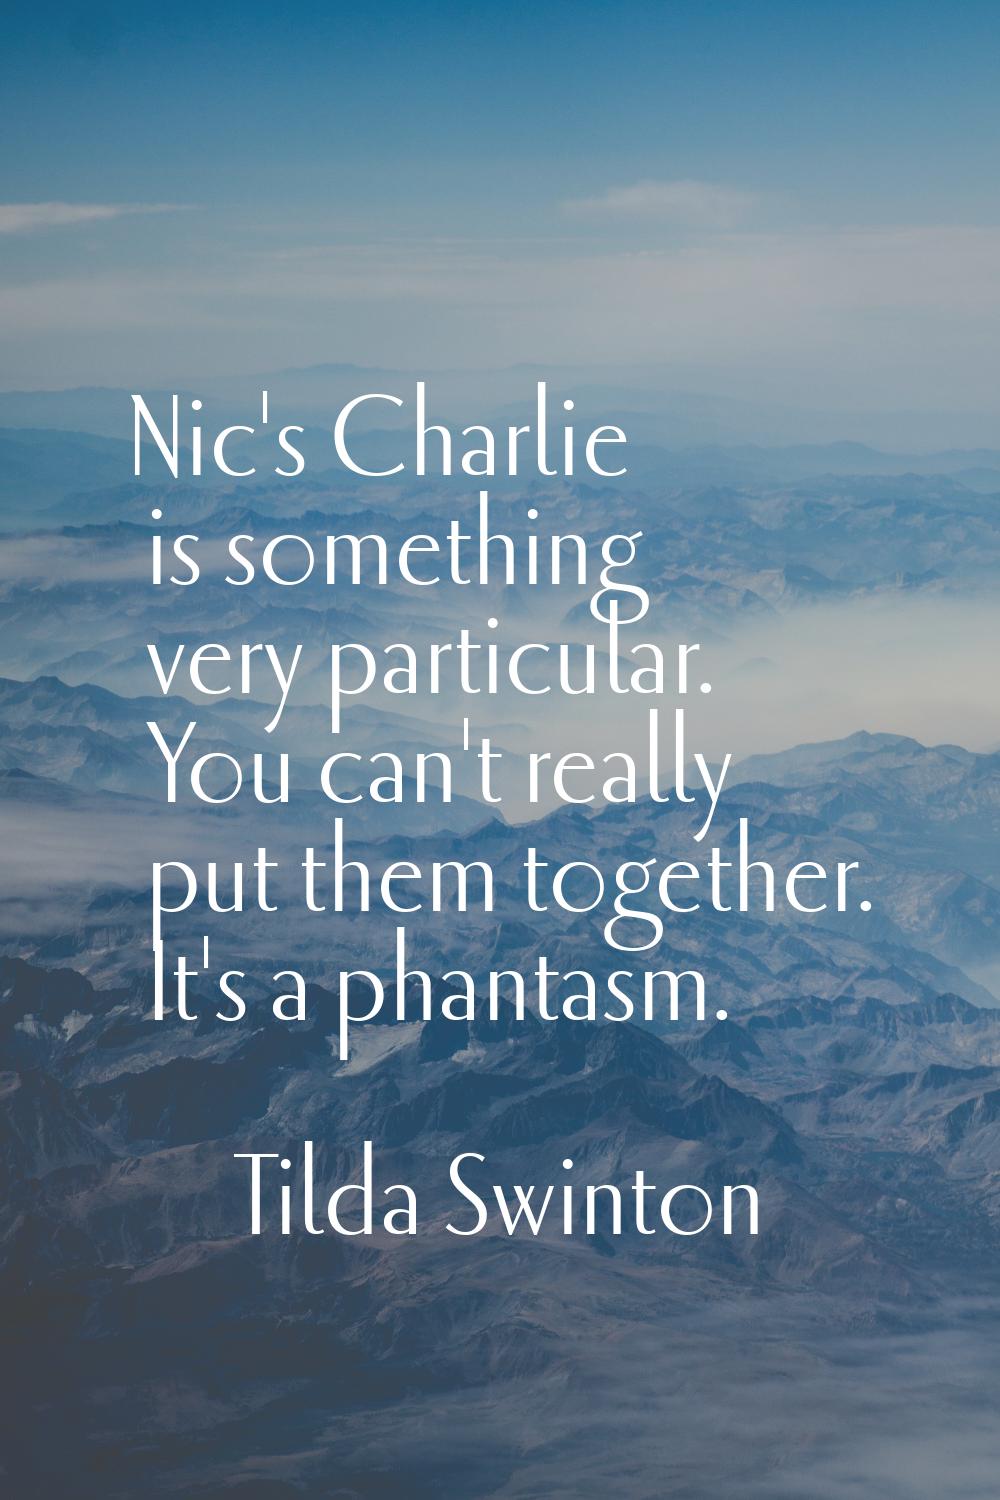 Nic's Charlie is something very particular. You can't really put them together. It's a phantasm.